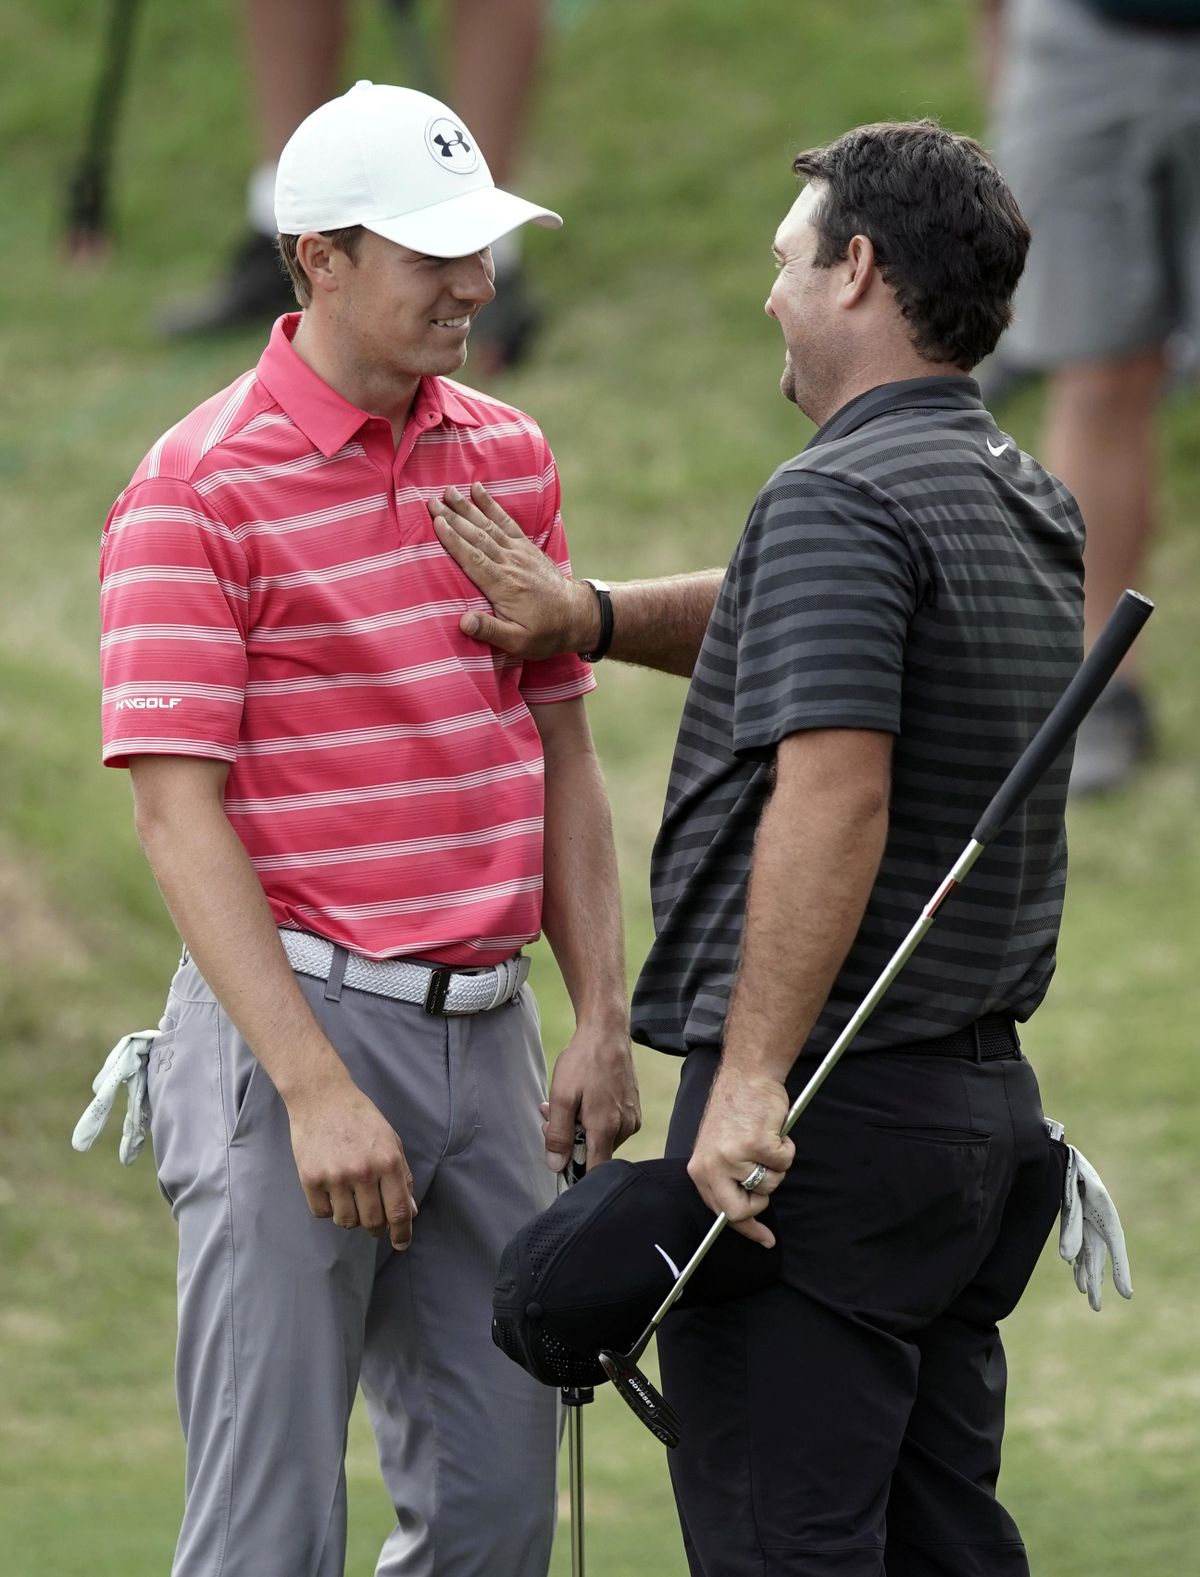 Jordan Spieth, left, is patted on the chest by opponent Patrick Reed, right, after losing the round in round-robin play at the Dell Technologies Match Play golf tournament, Friday, March 23, 2018, in Austin, Texas. (Eric Gay / Associated Press)